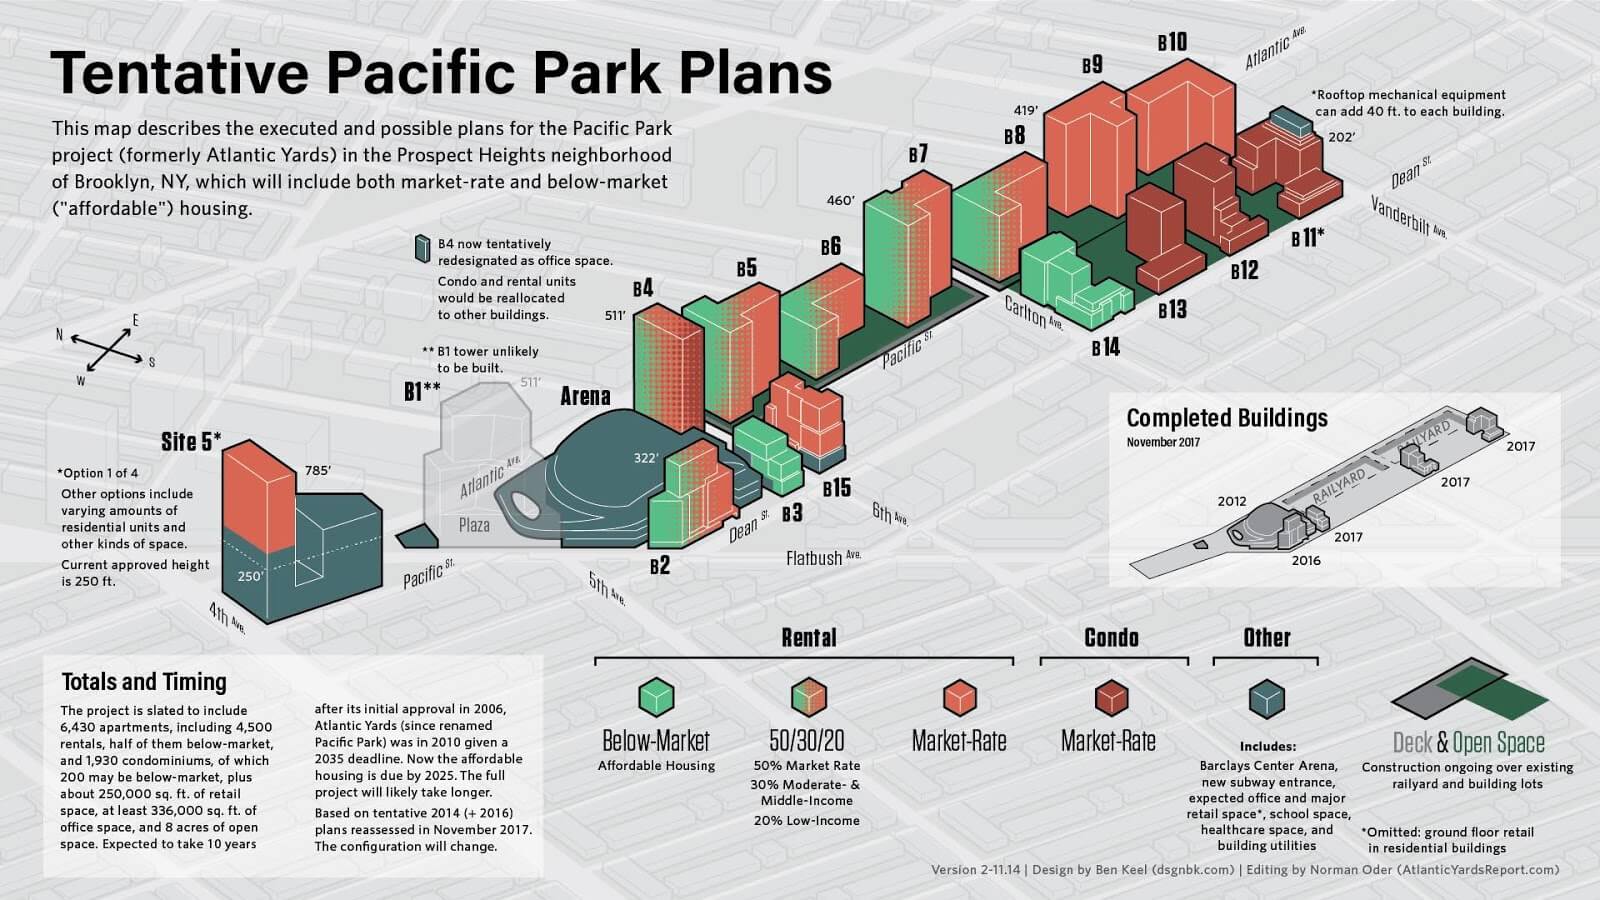 A November 2017 representation of project plans. Graphic by Ben Keel via Atlantic Yards/Pacific Park Report 